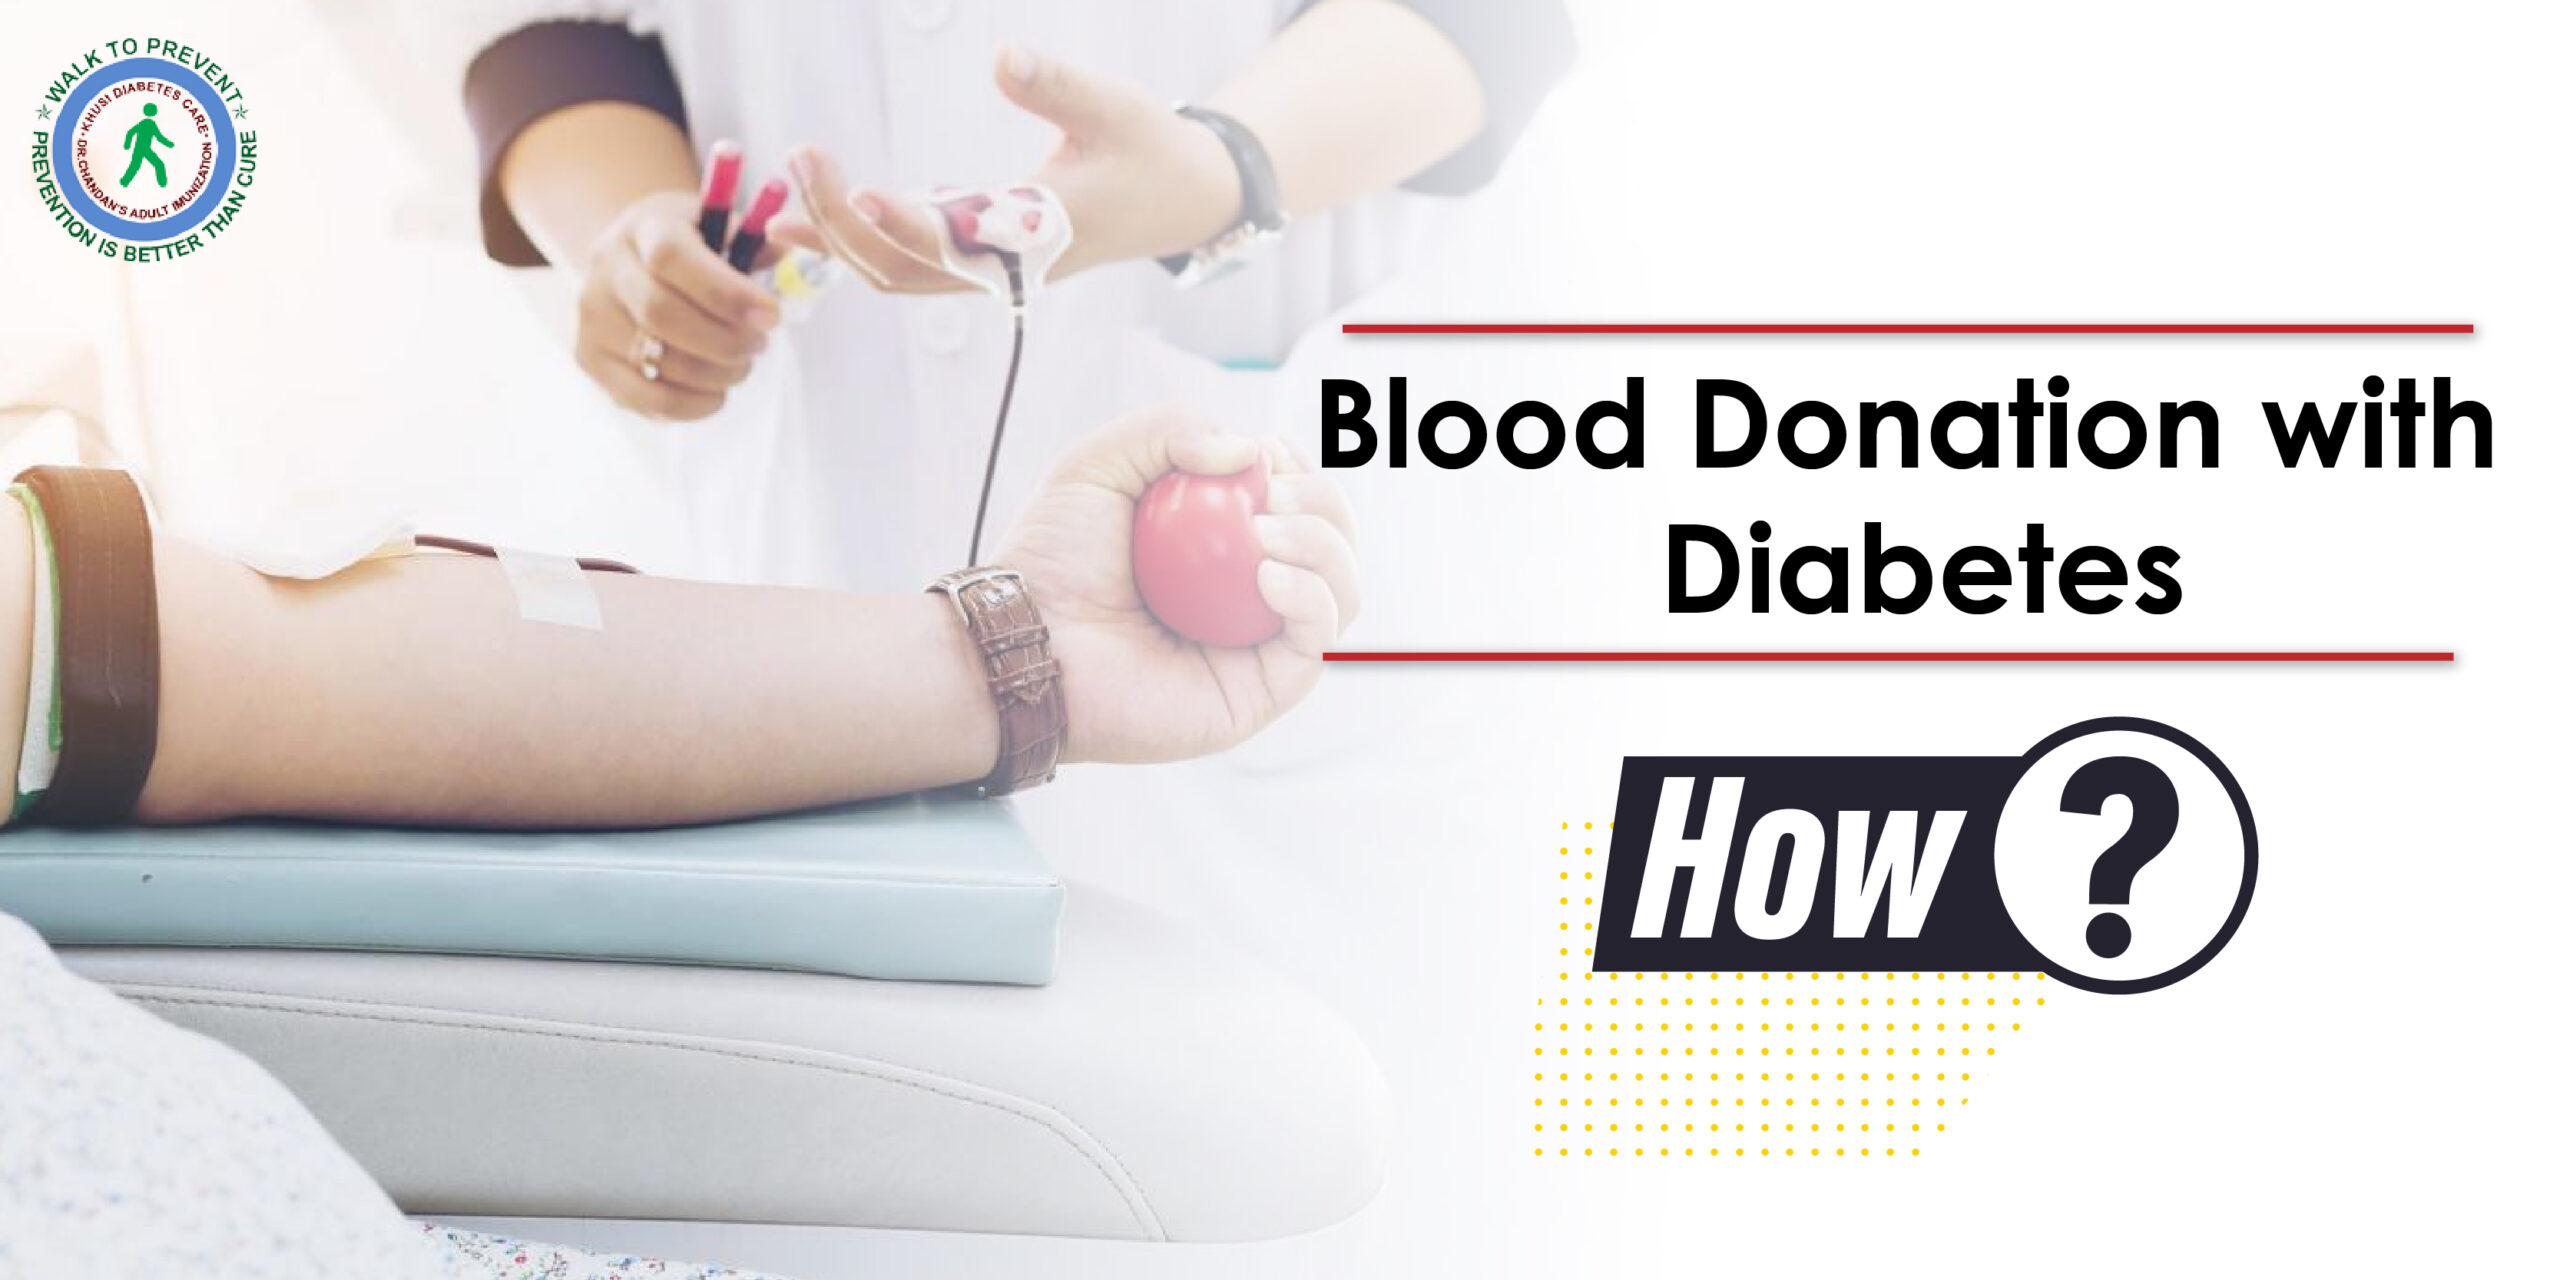 Is It True That You Can Donate Blood With Diabetes? If So, How? 